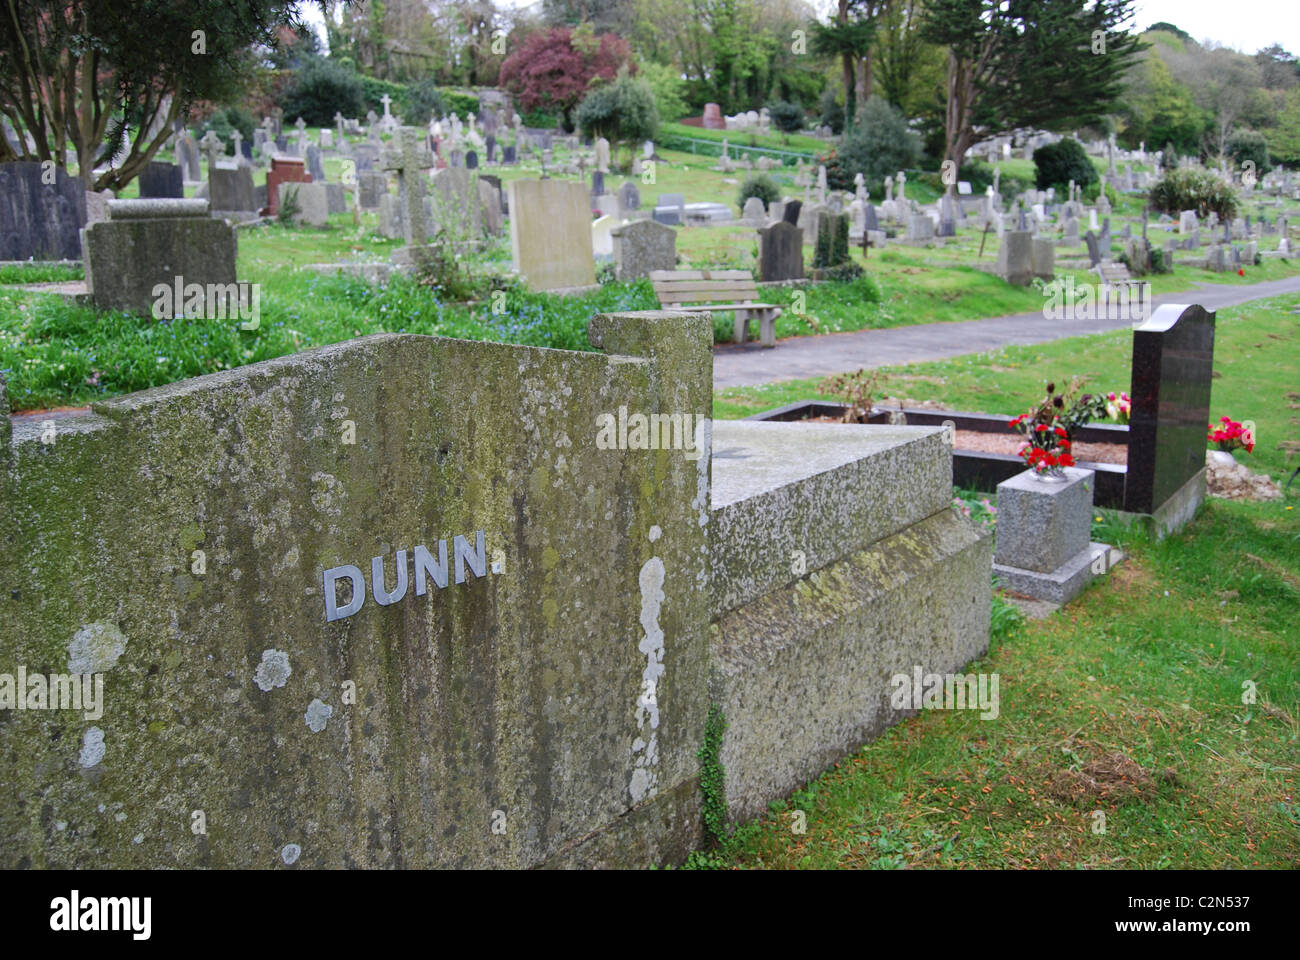 Epitaph Dunn, Swanpool grave yard, Falmouth, Cornwall, UK Banque D'Images